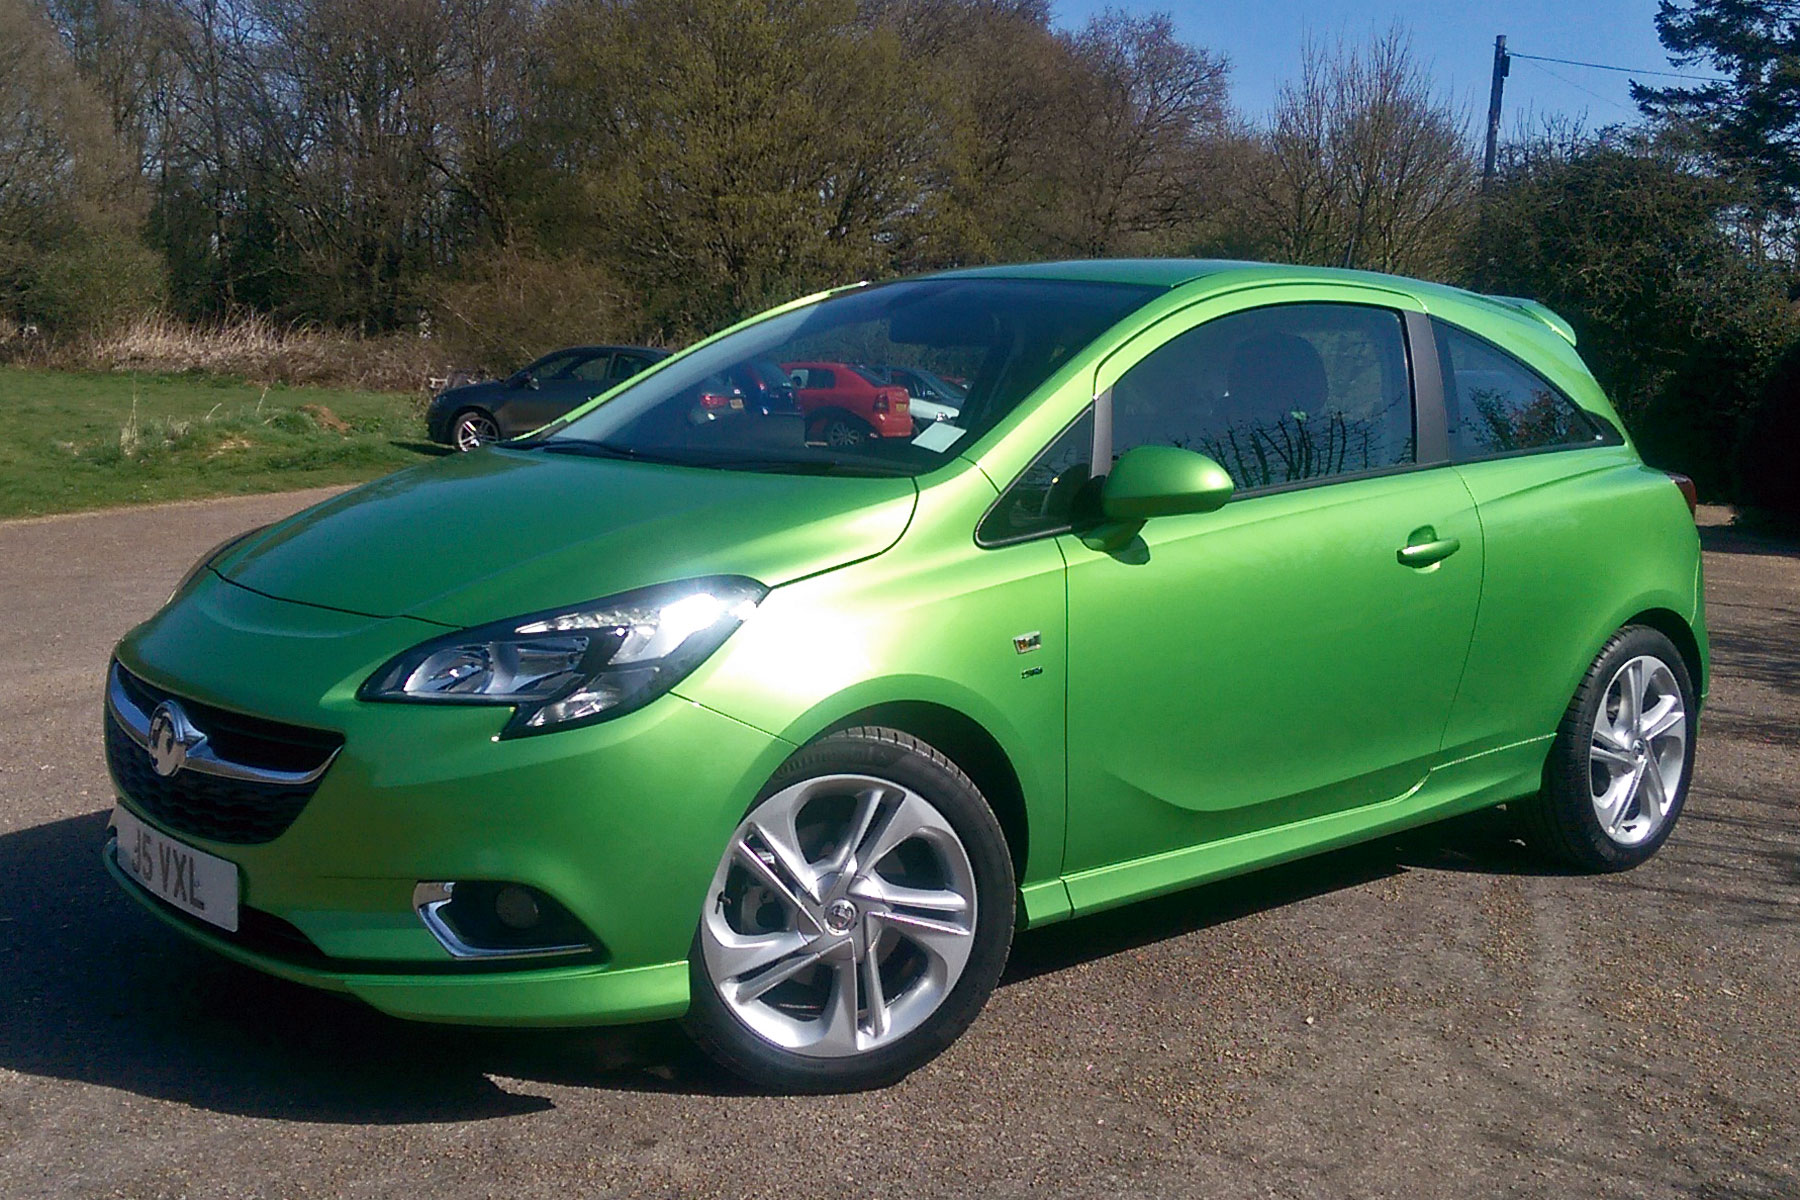 Vauxhall Corsa 1.0T 115 (2015) long-term review | Motoring Research